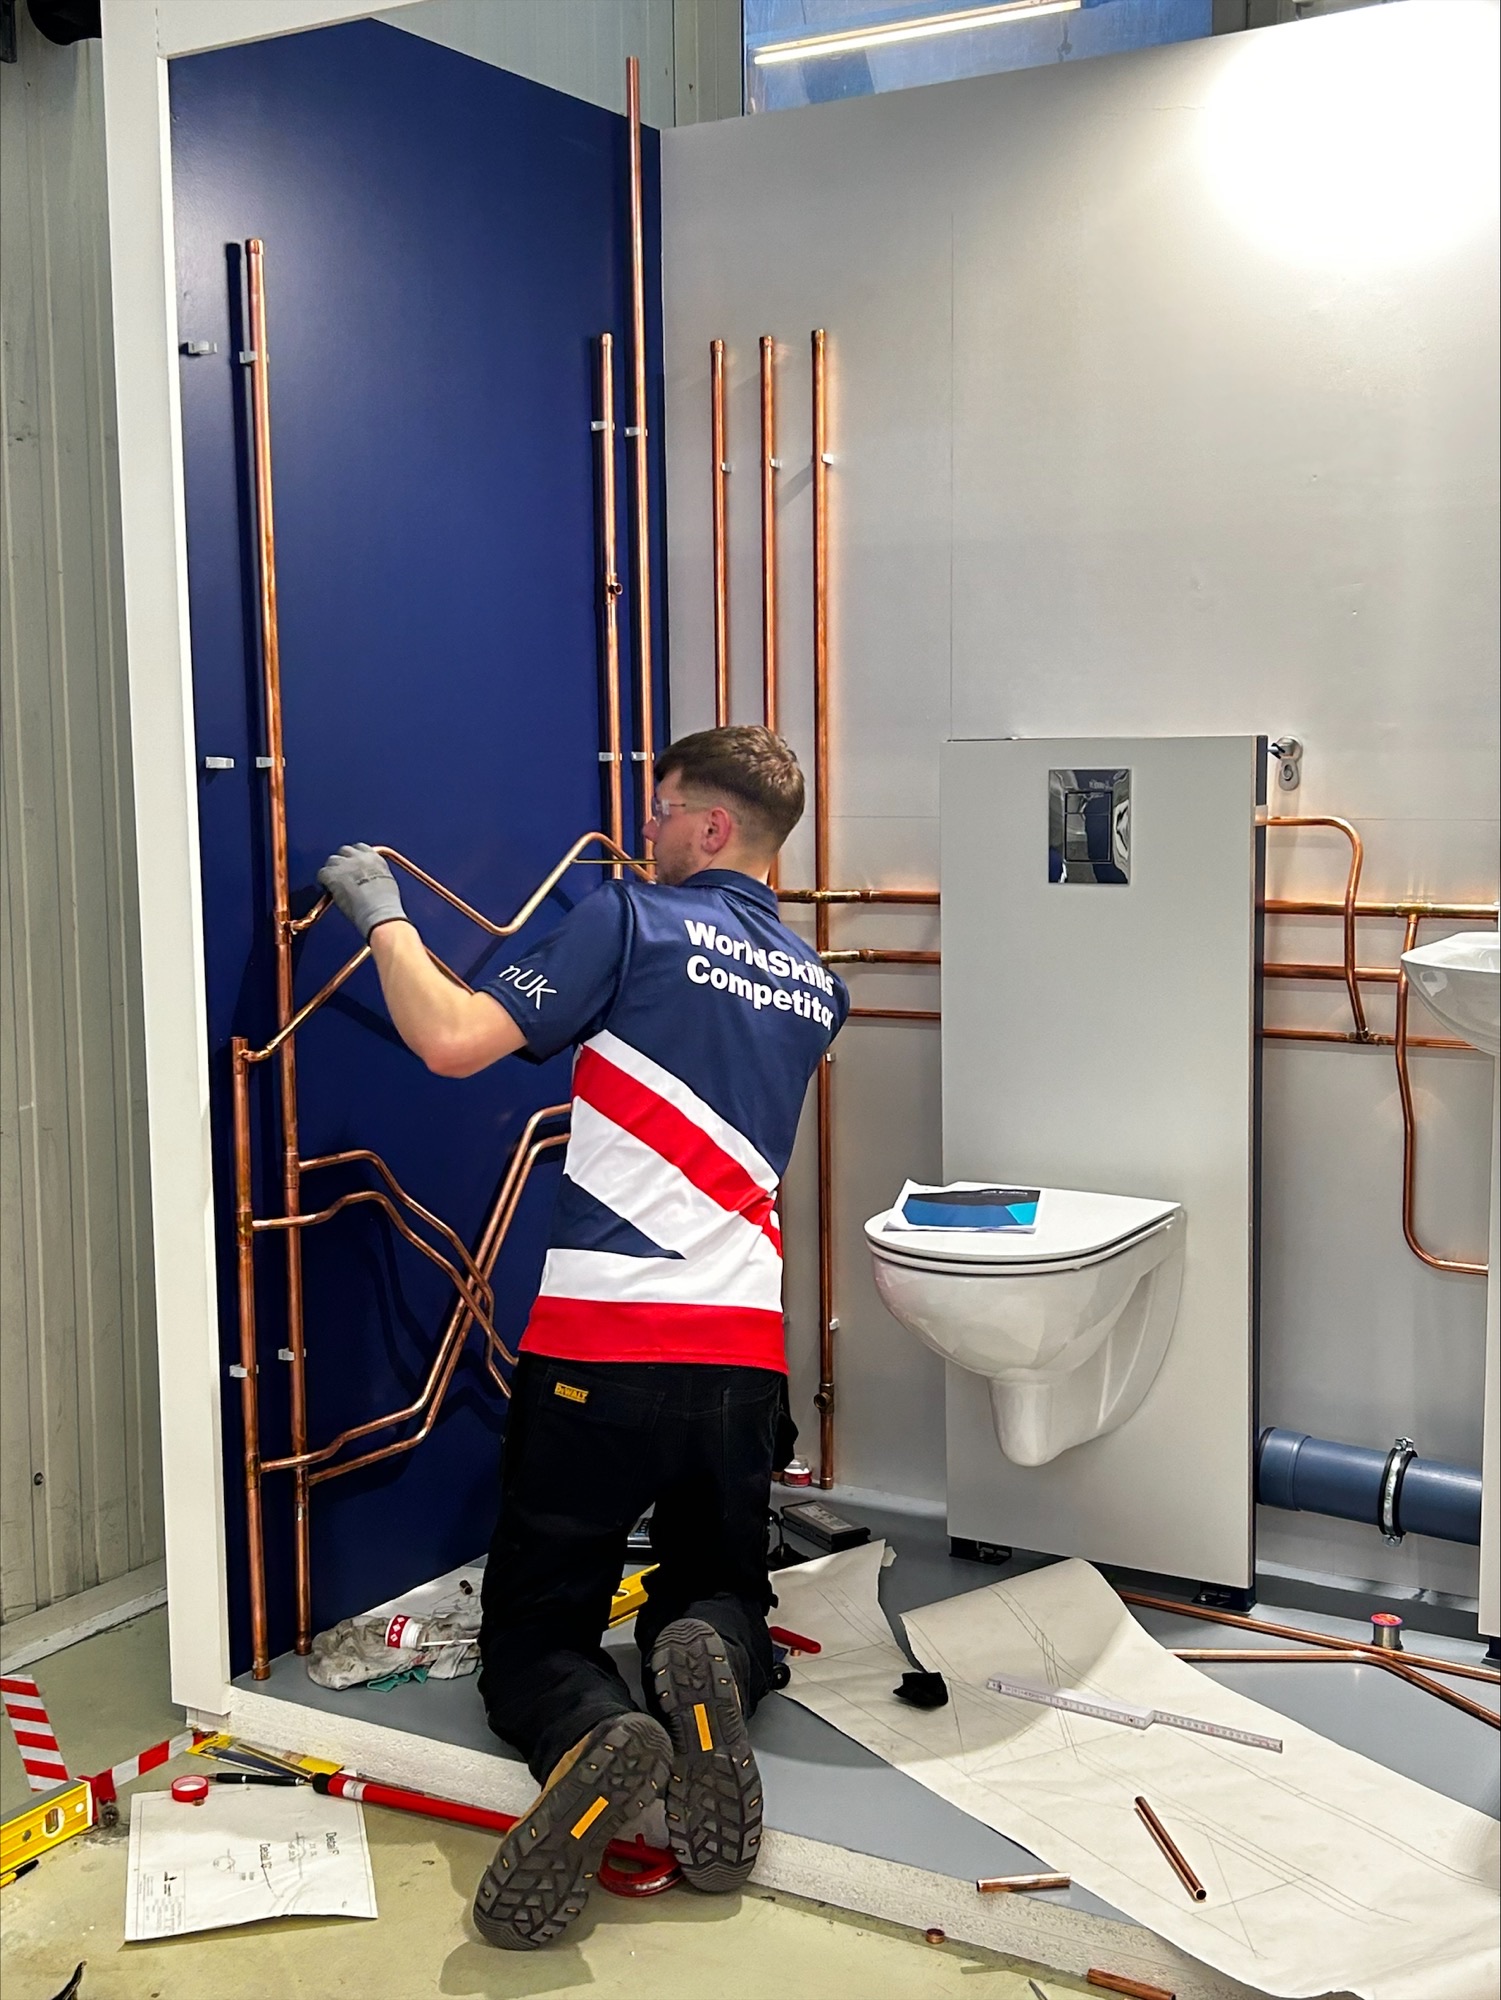 The Scottish plumber competes best in the WorldSkills Finals